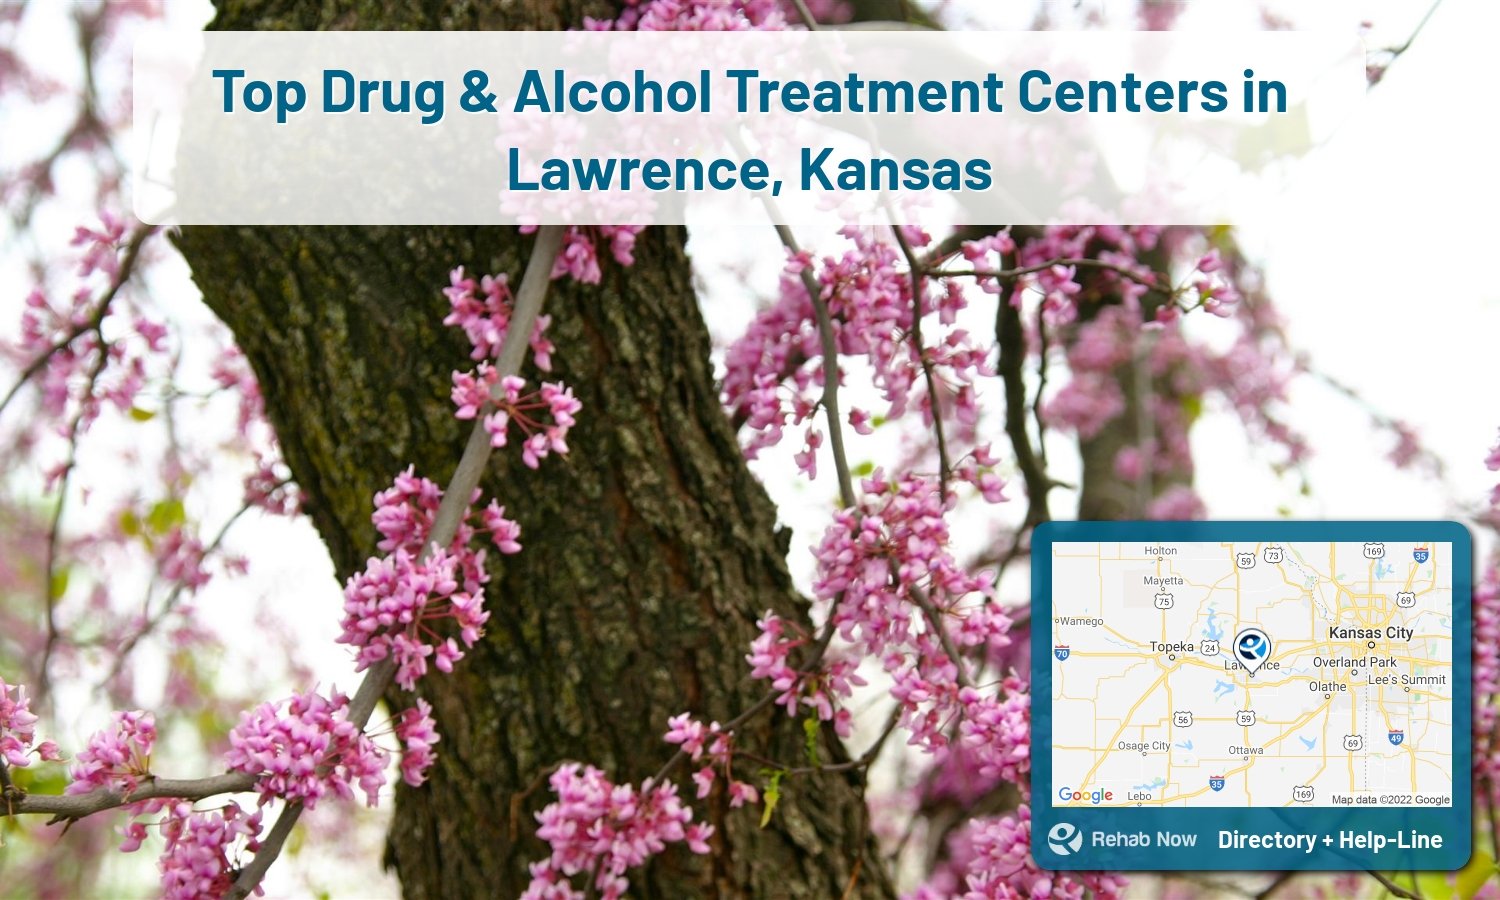 Ready to pick a rehab center in Lawrence? Get off alcohol, opiates, and other drugs, by selecting top drug rehab centers in Kansas